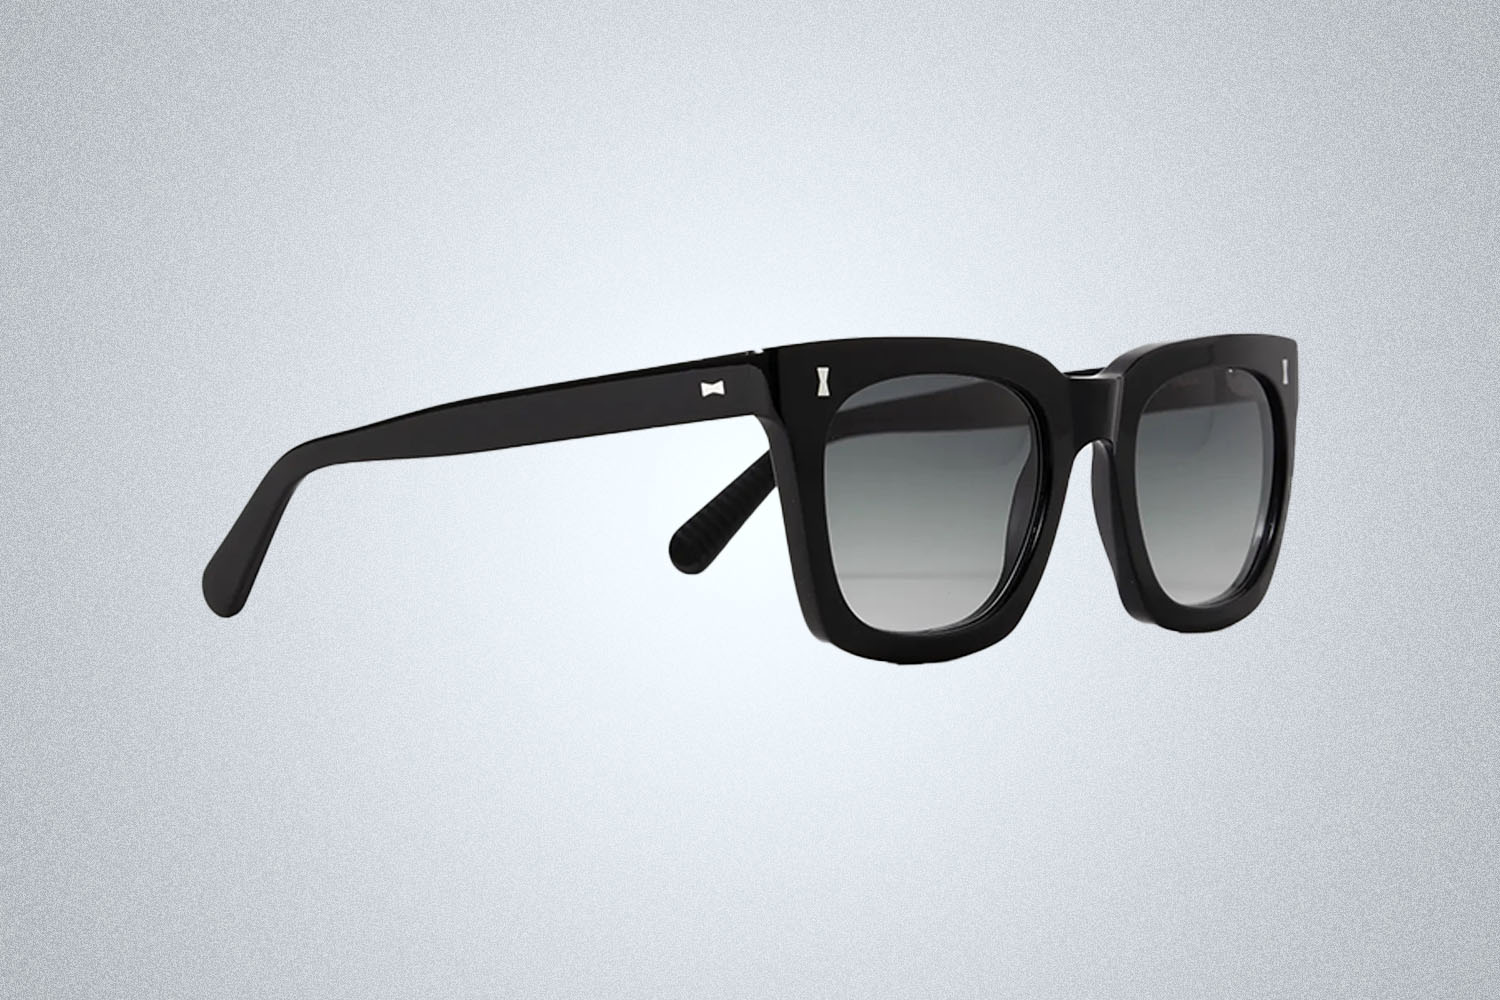 a pair of black sunglasses from Mr. Porter on a grey background